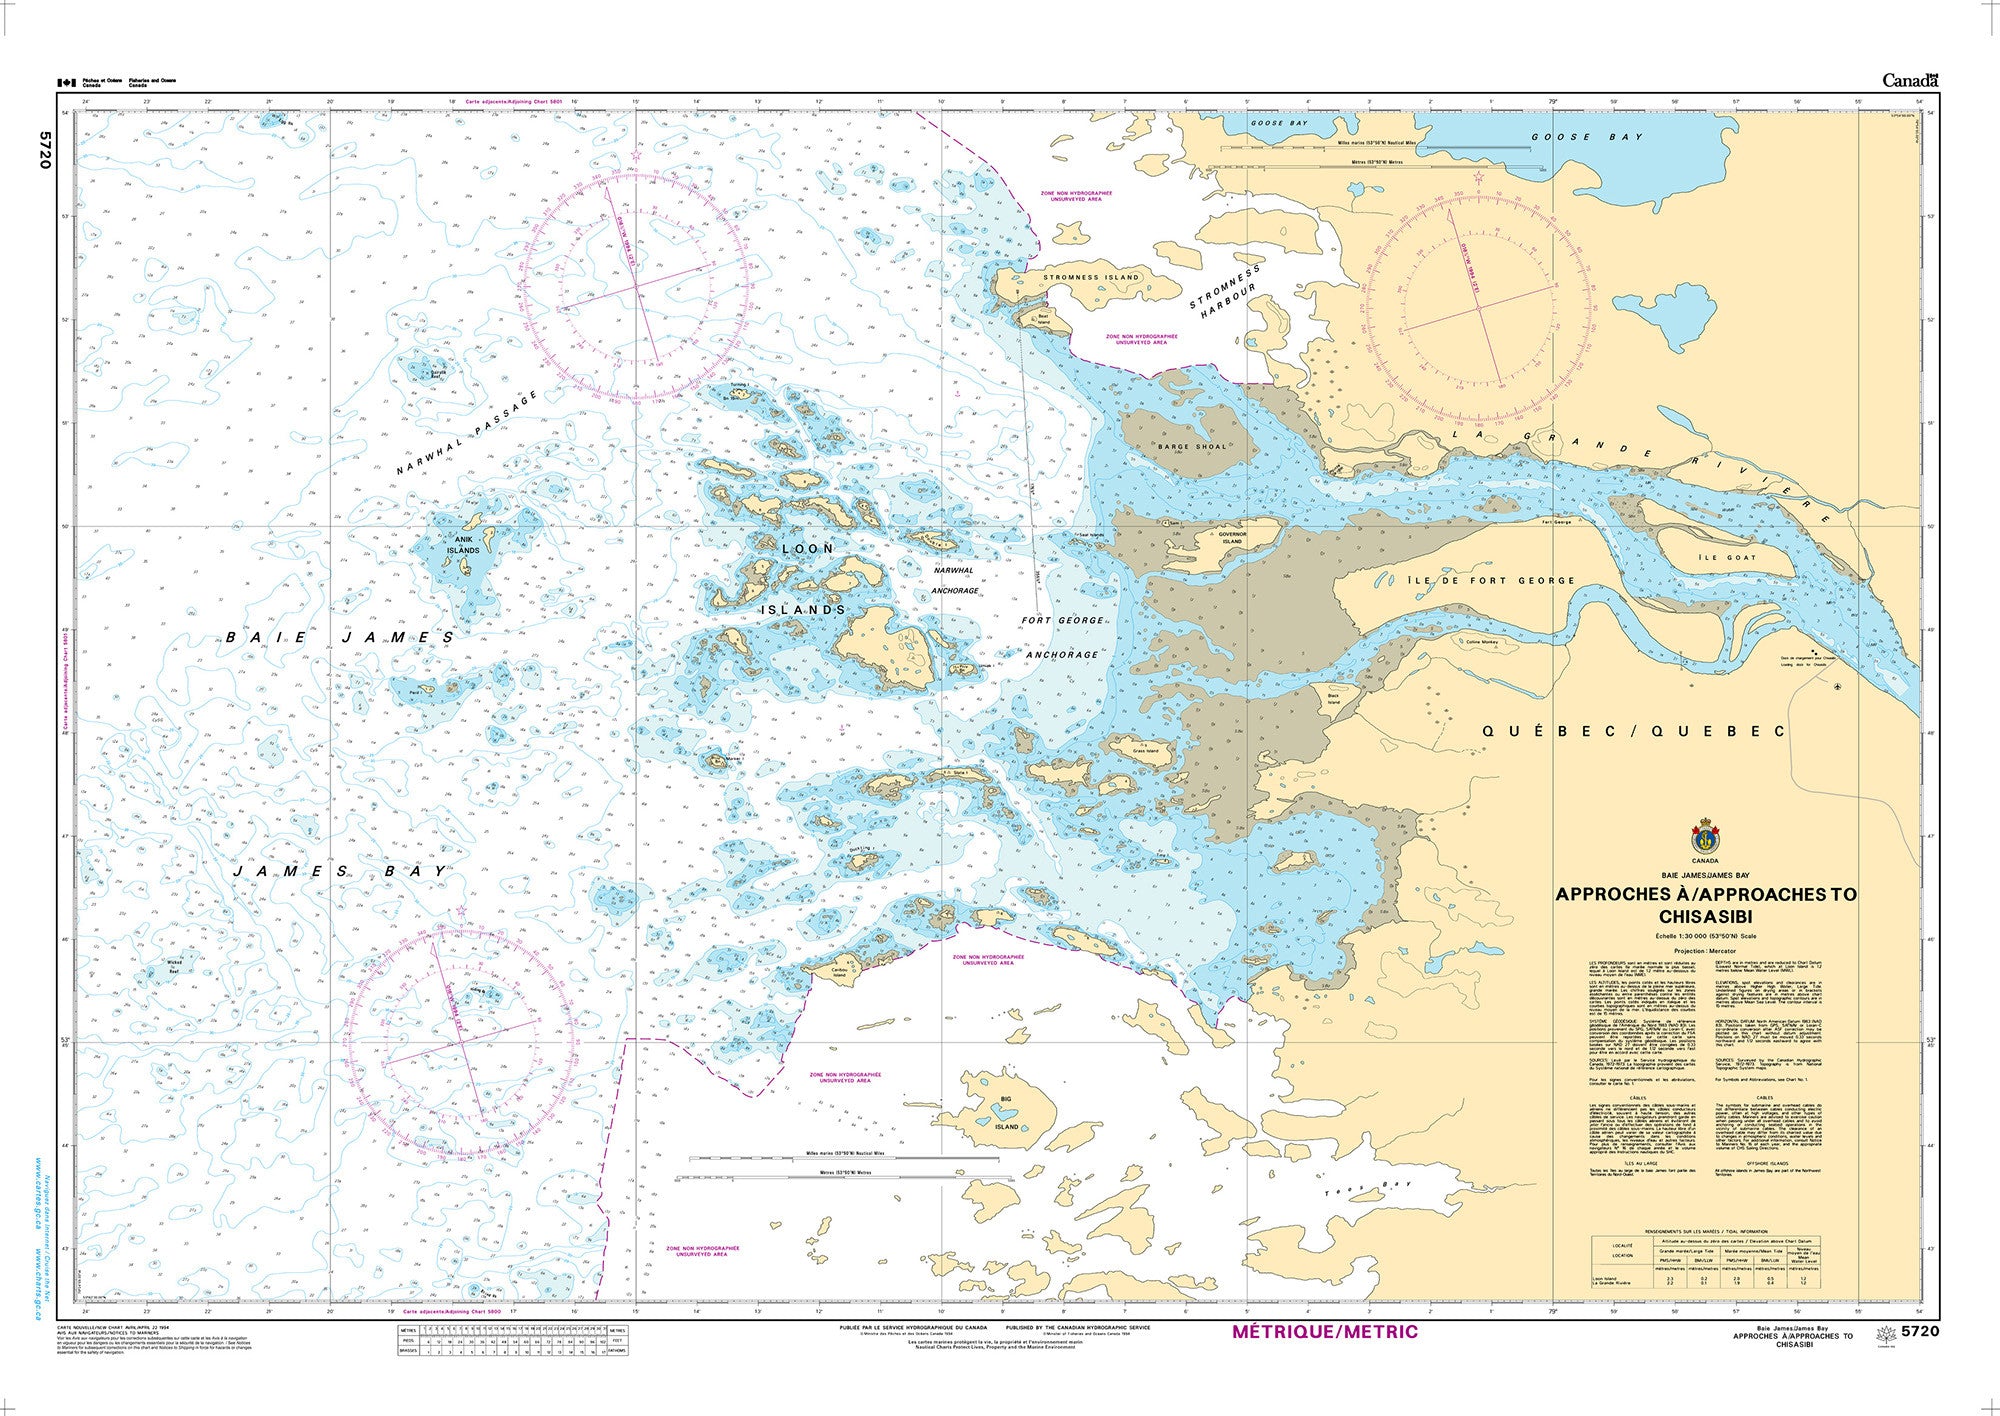 Canadian Hydrographic Service Nautical Chart CHS5720: Approches à/Approaches to Chisasibi